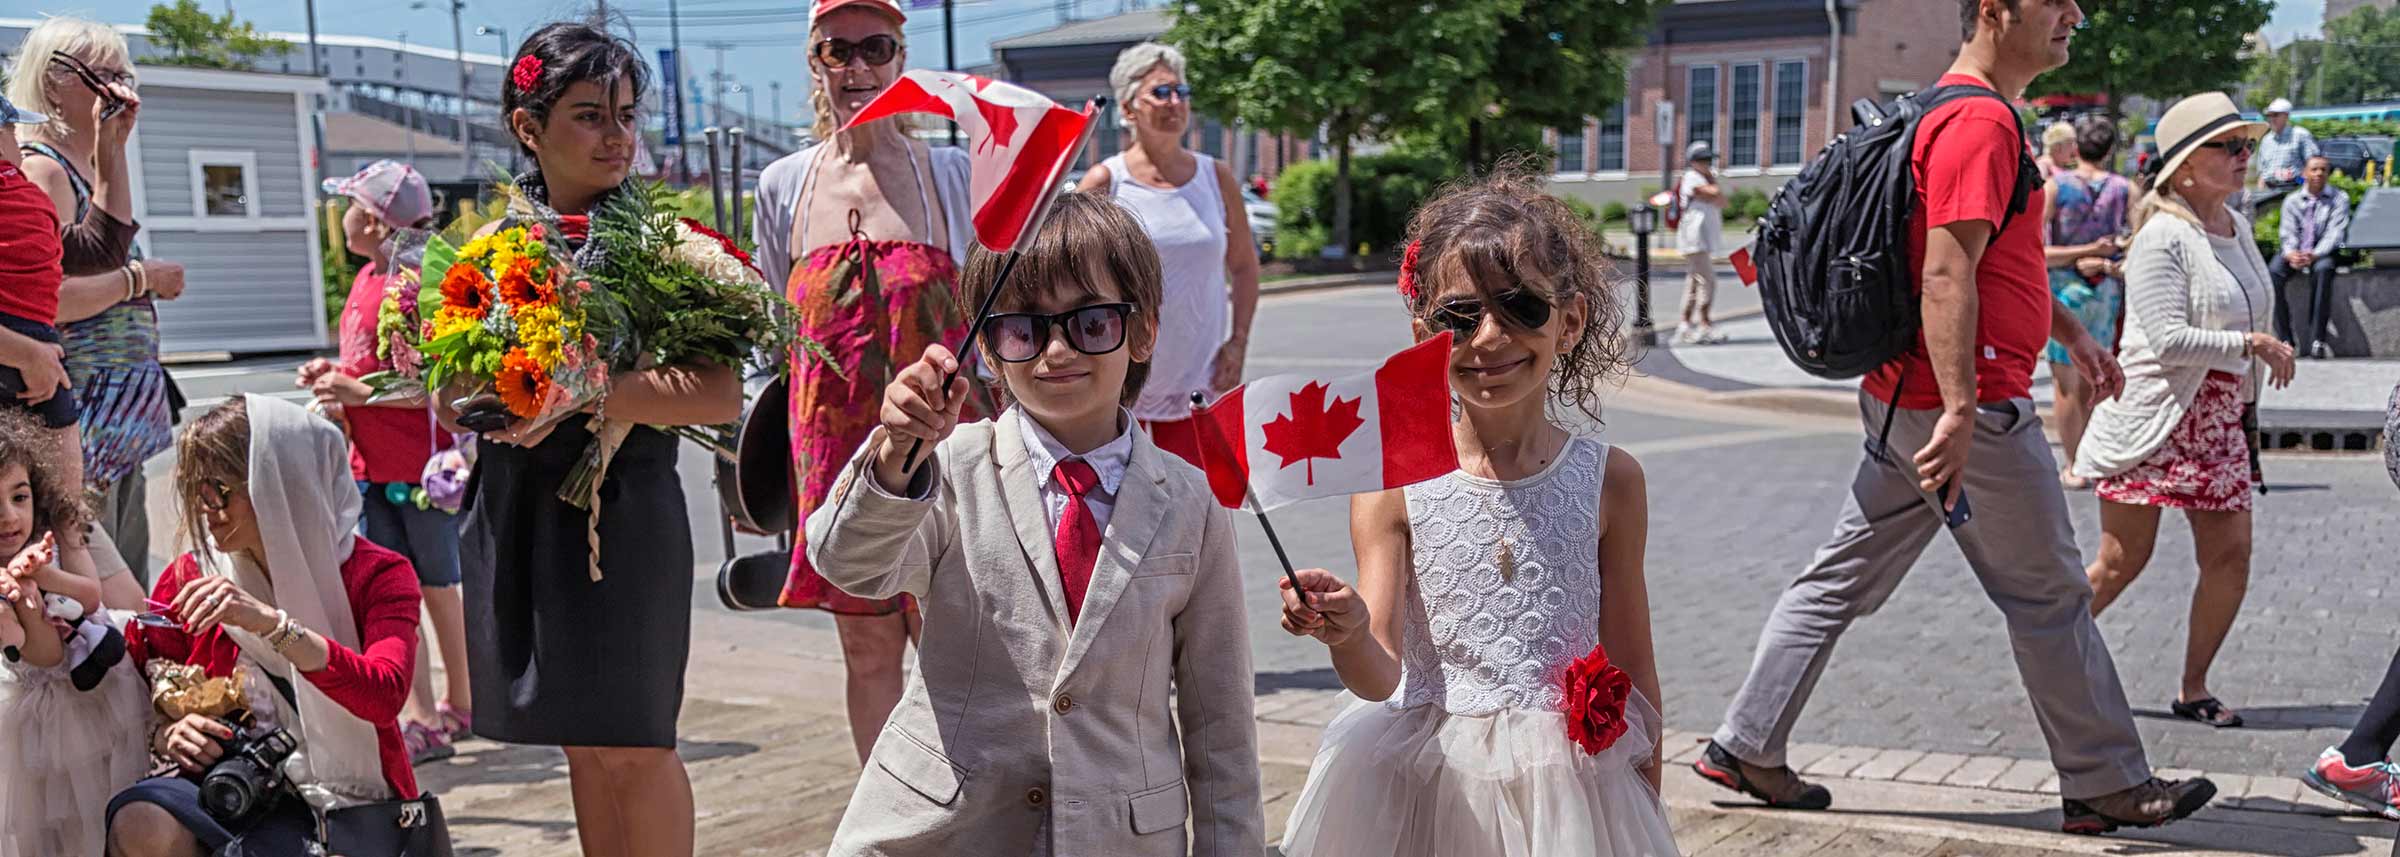 A boy and girl dressed in red and white for Canada Day celebrations